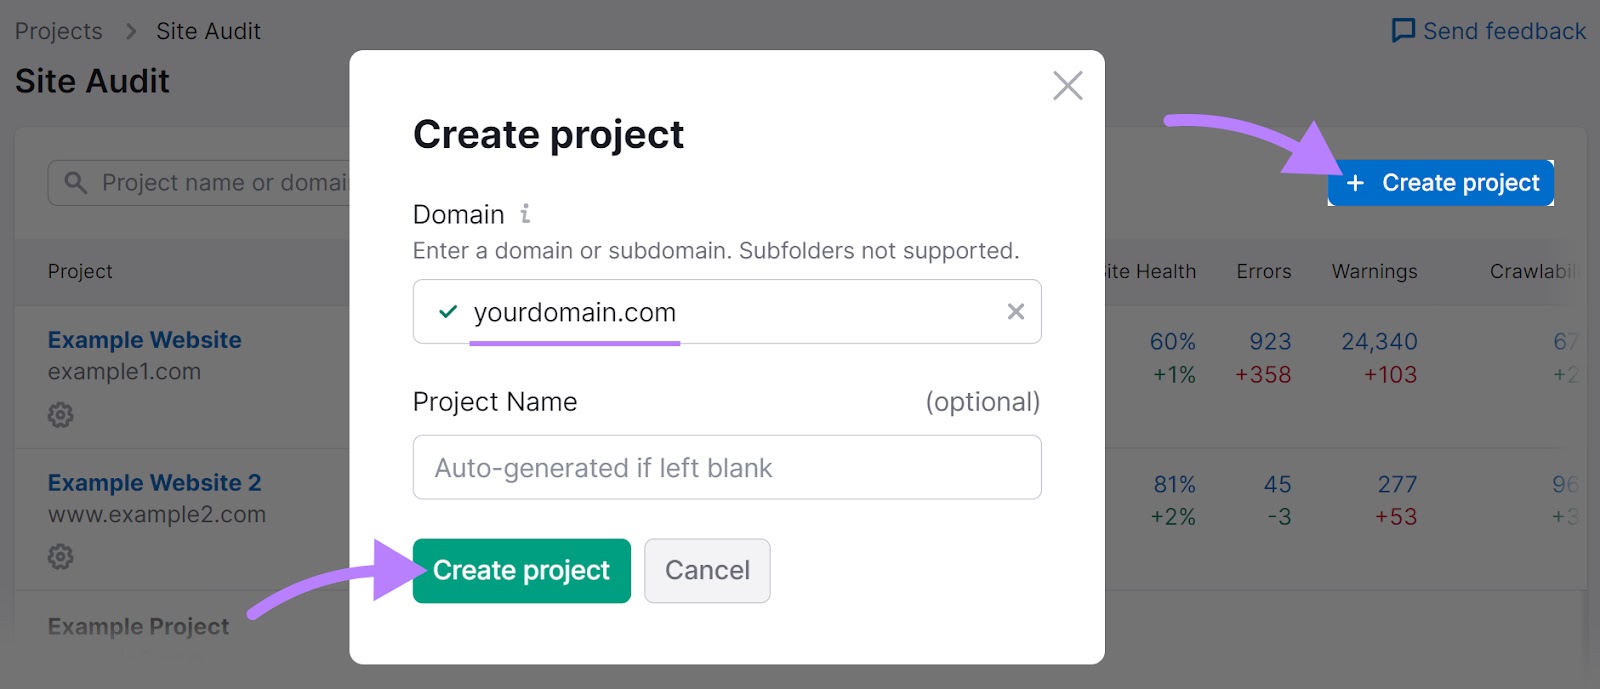 Create a project in the Site Audit tool